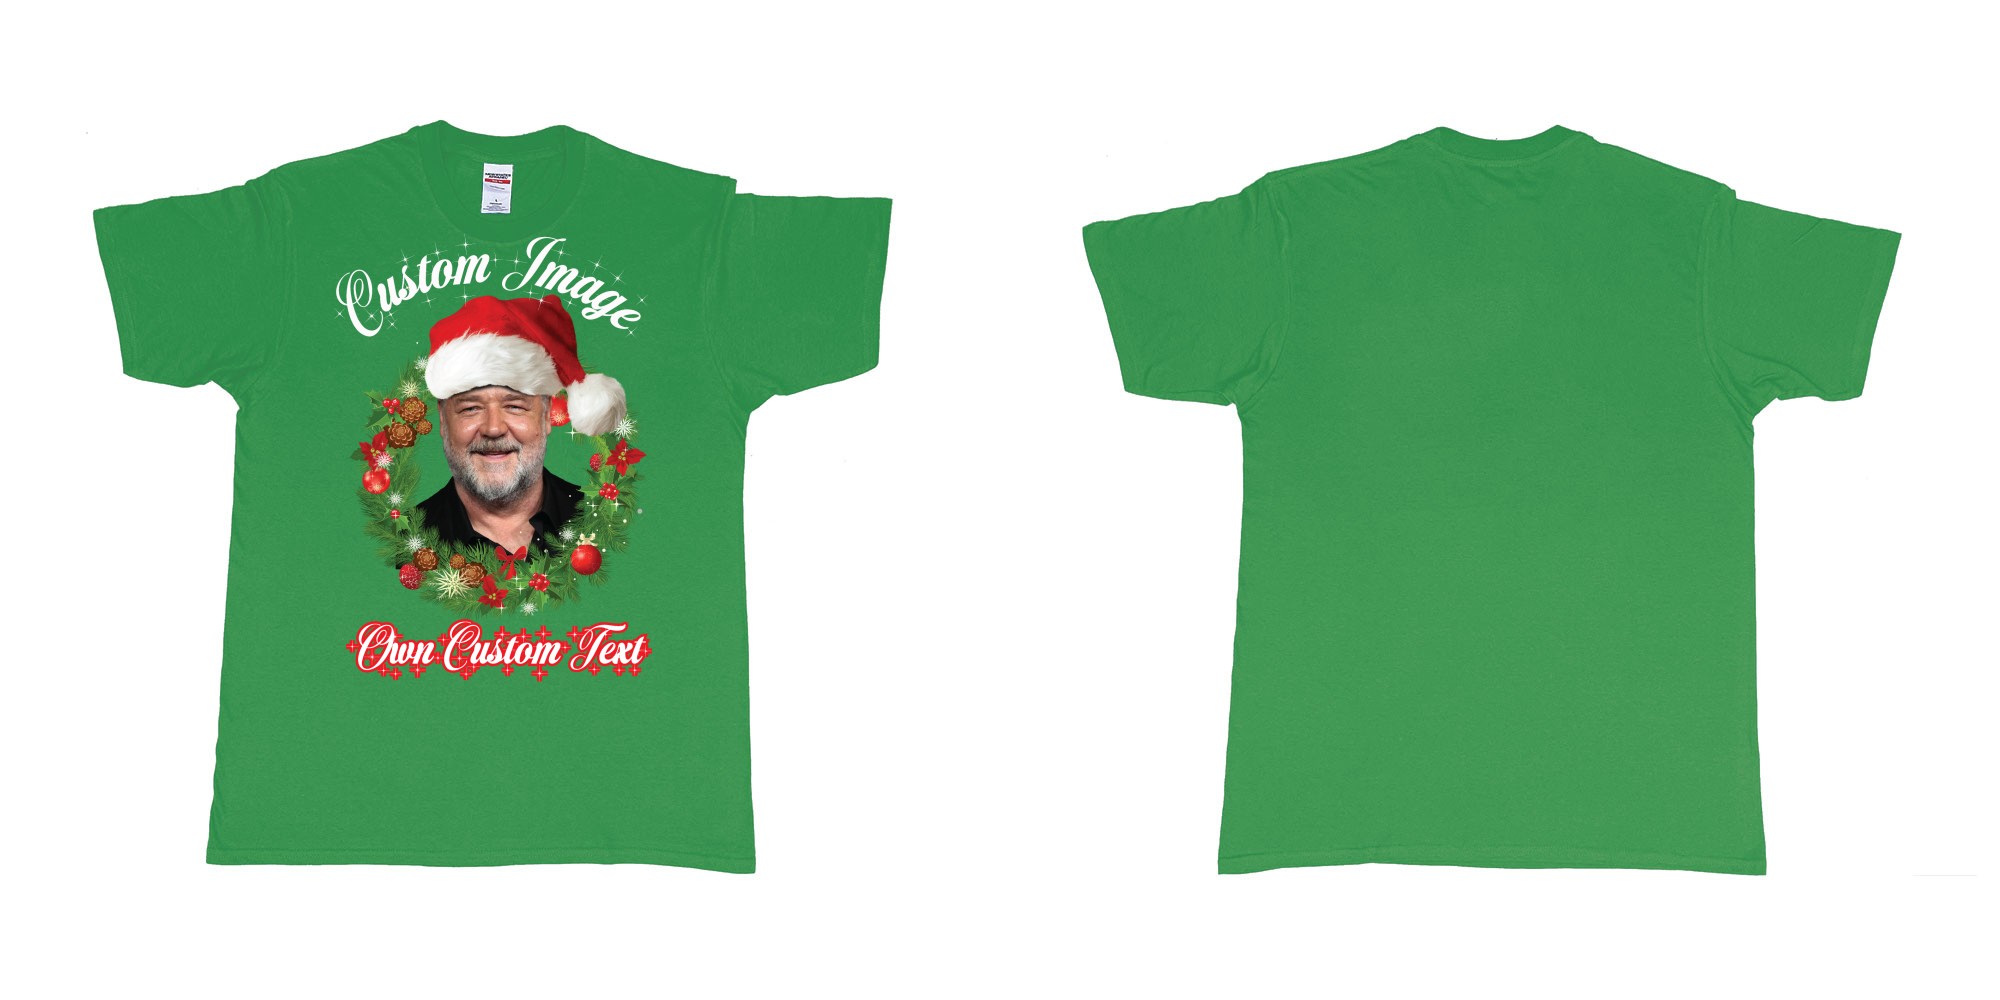 Custom tshirt design christmas wreath custom face image text in fabric color irish-green choice your own text made in Bali by The Pirate Way